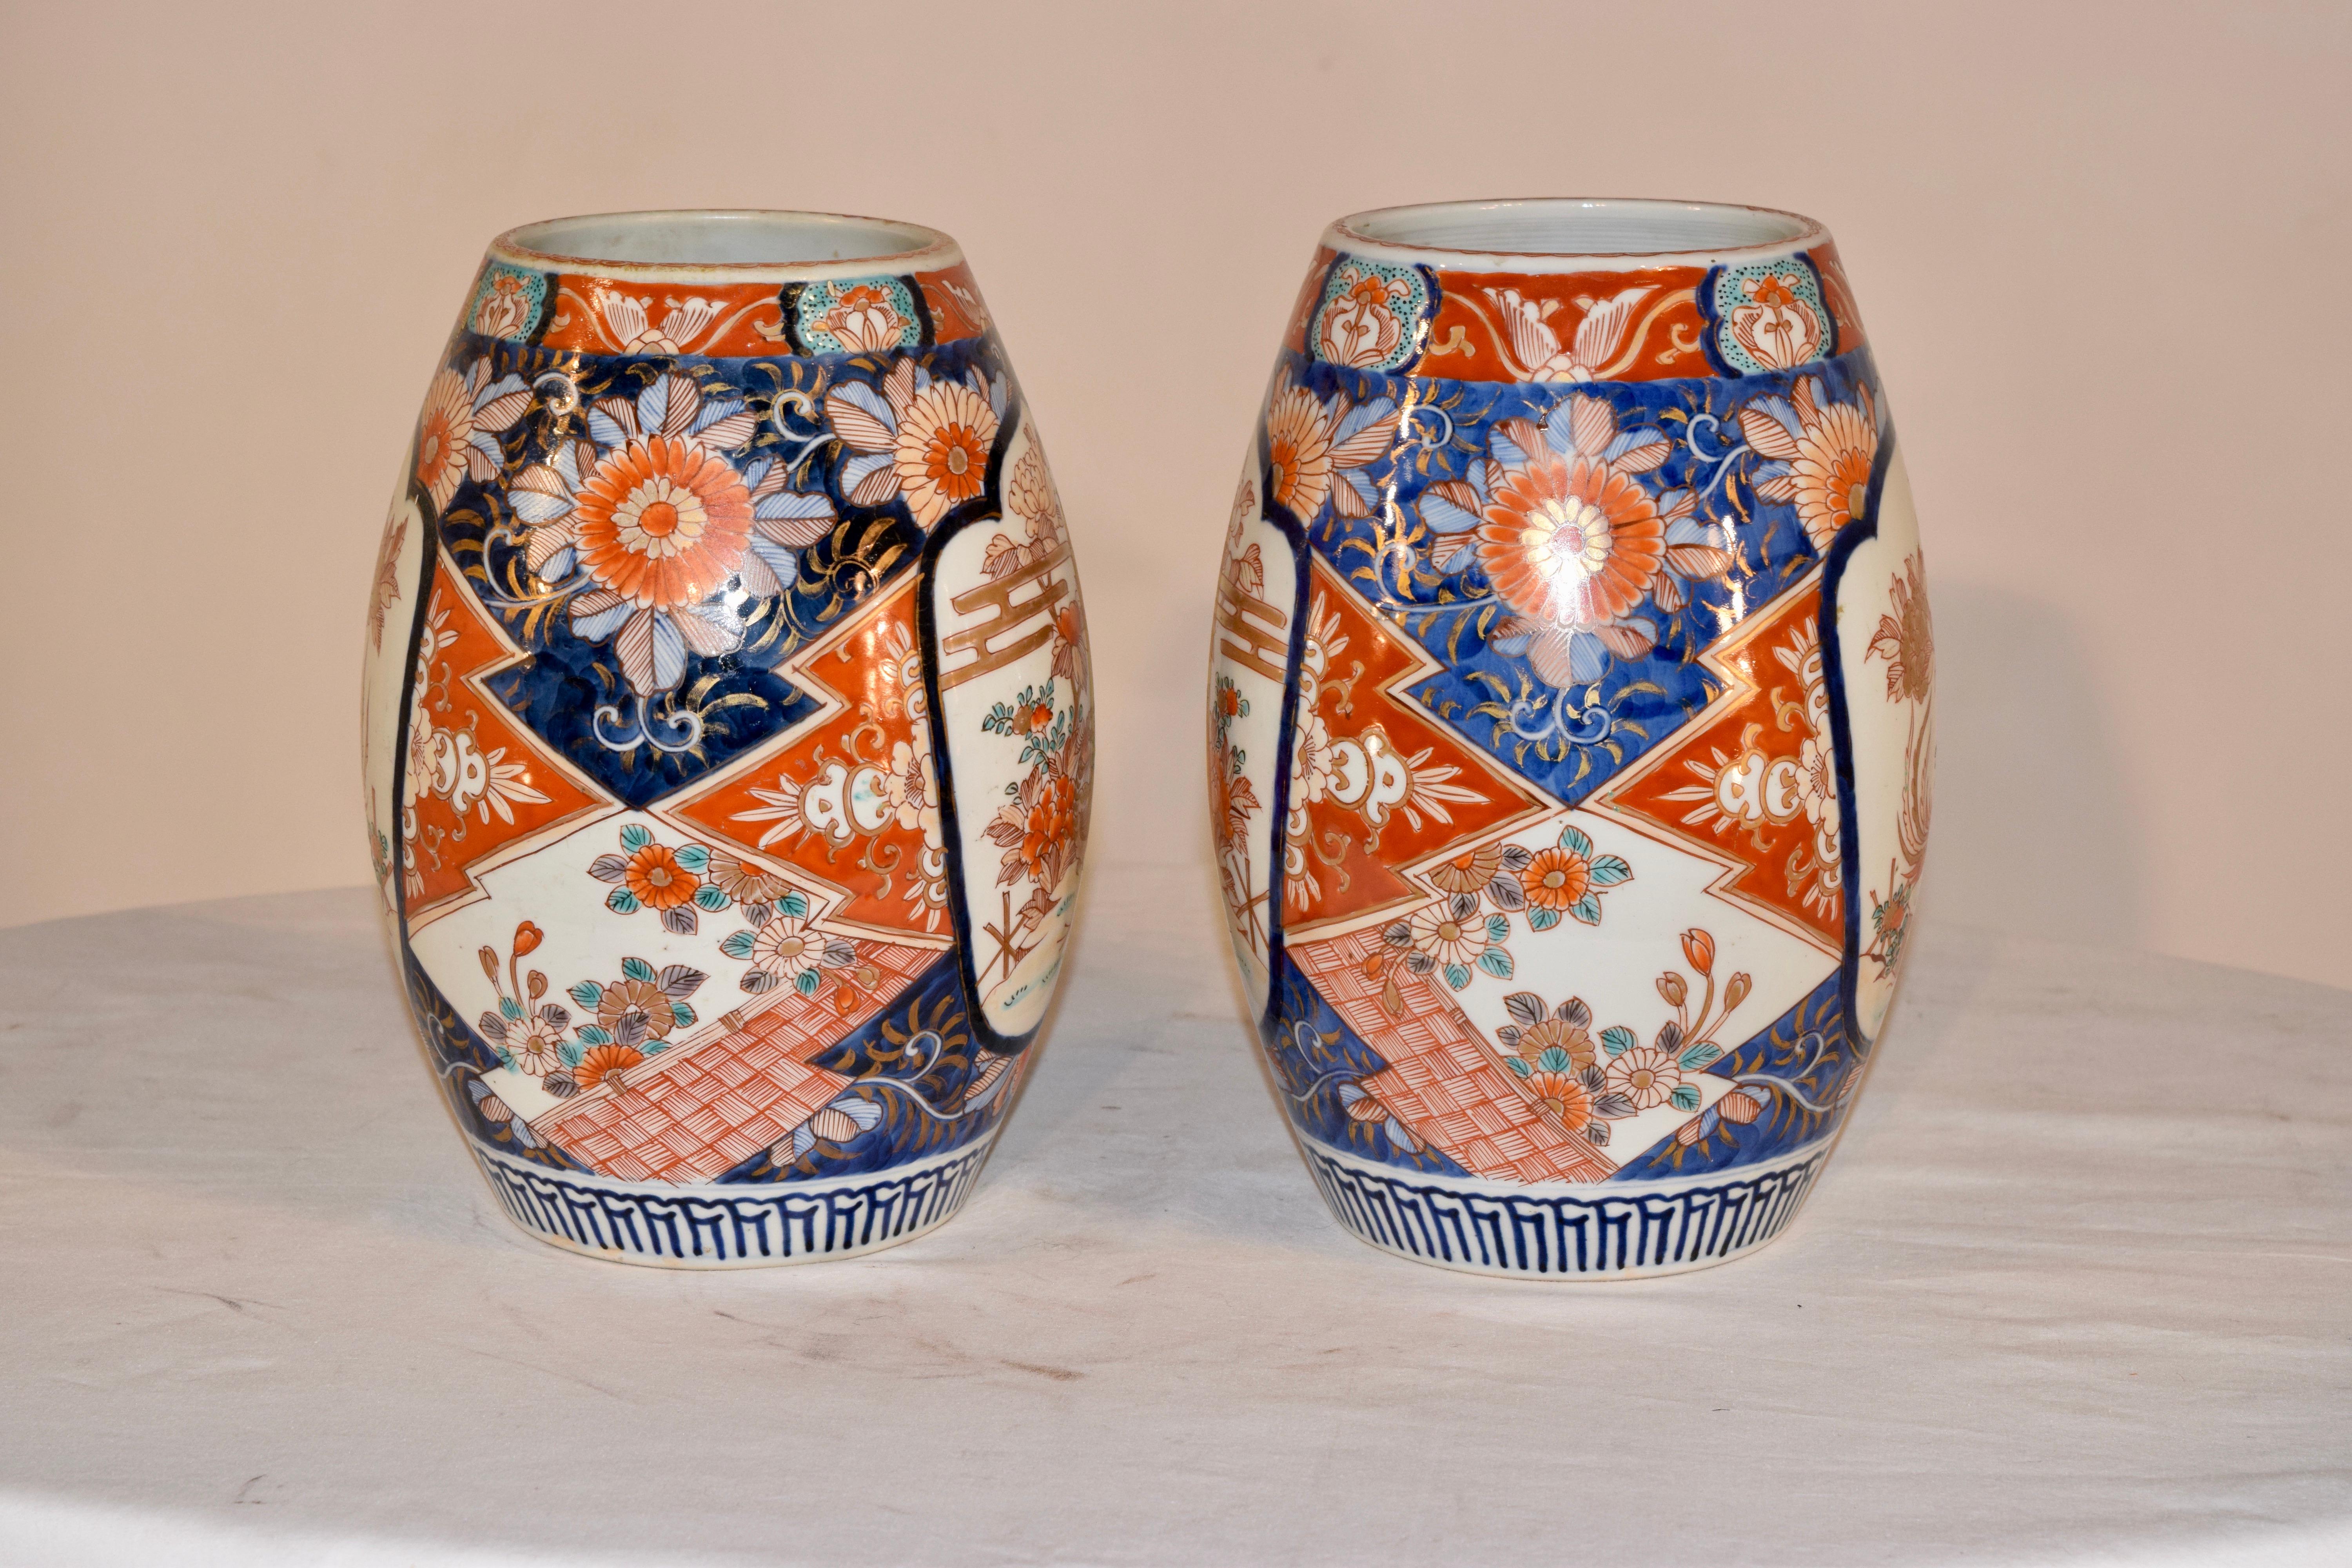 Pair of 19th century Imari vases in an unusual cylindrical shape. Their are two cartouches on each vase depicting a bird in a garden. The cartouches are surrounded by geometric patterns in wonderful colors.